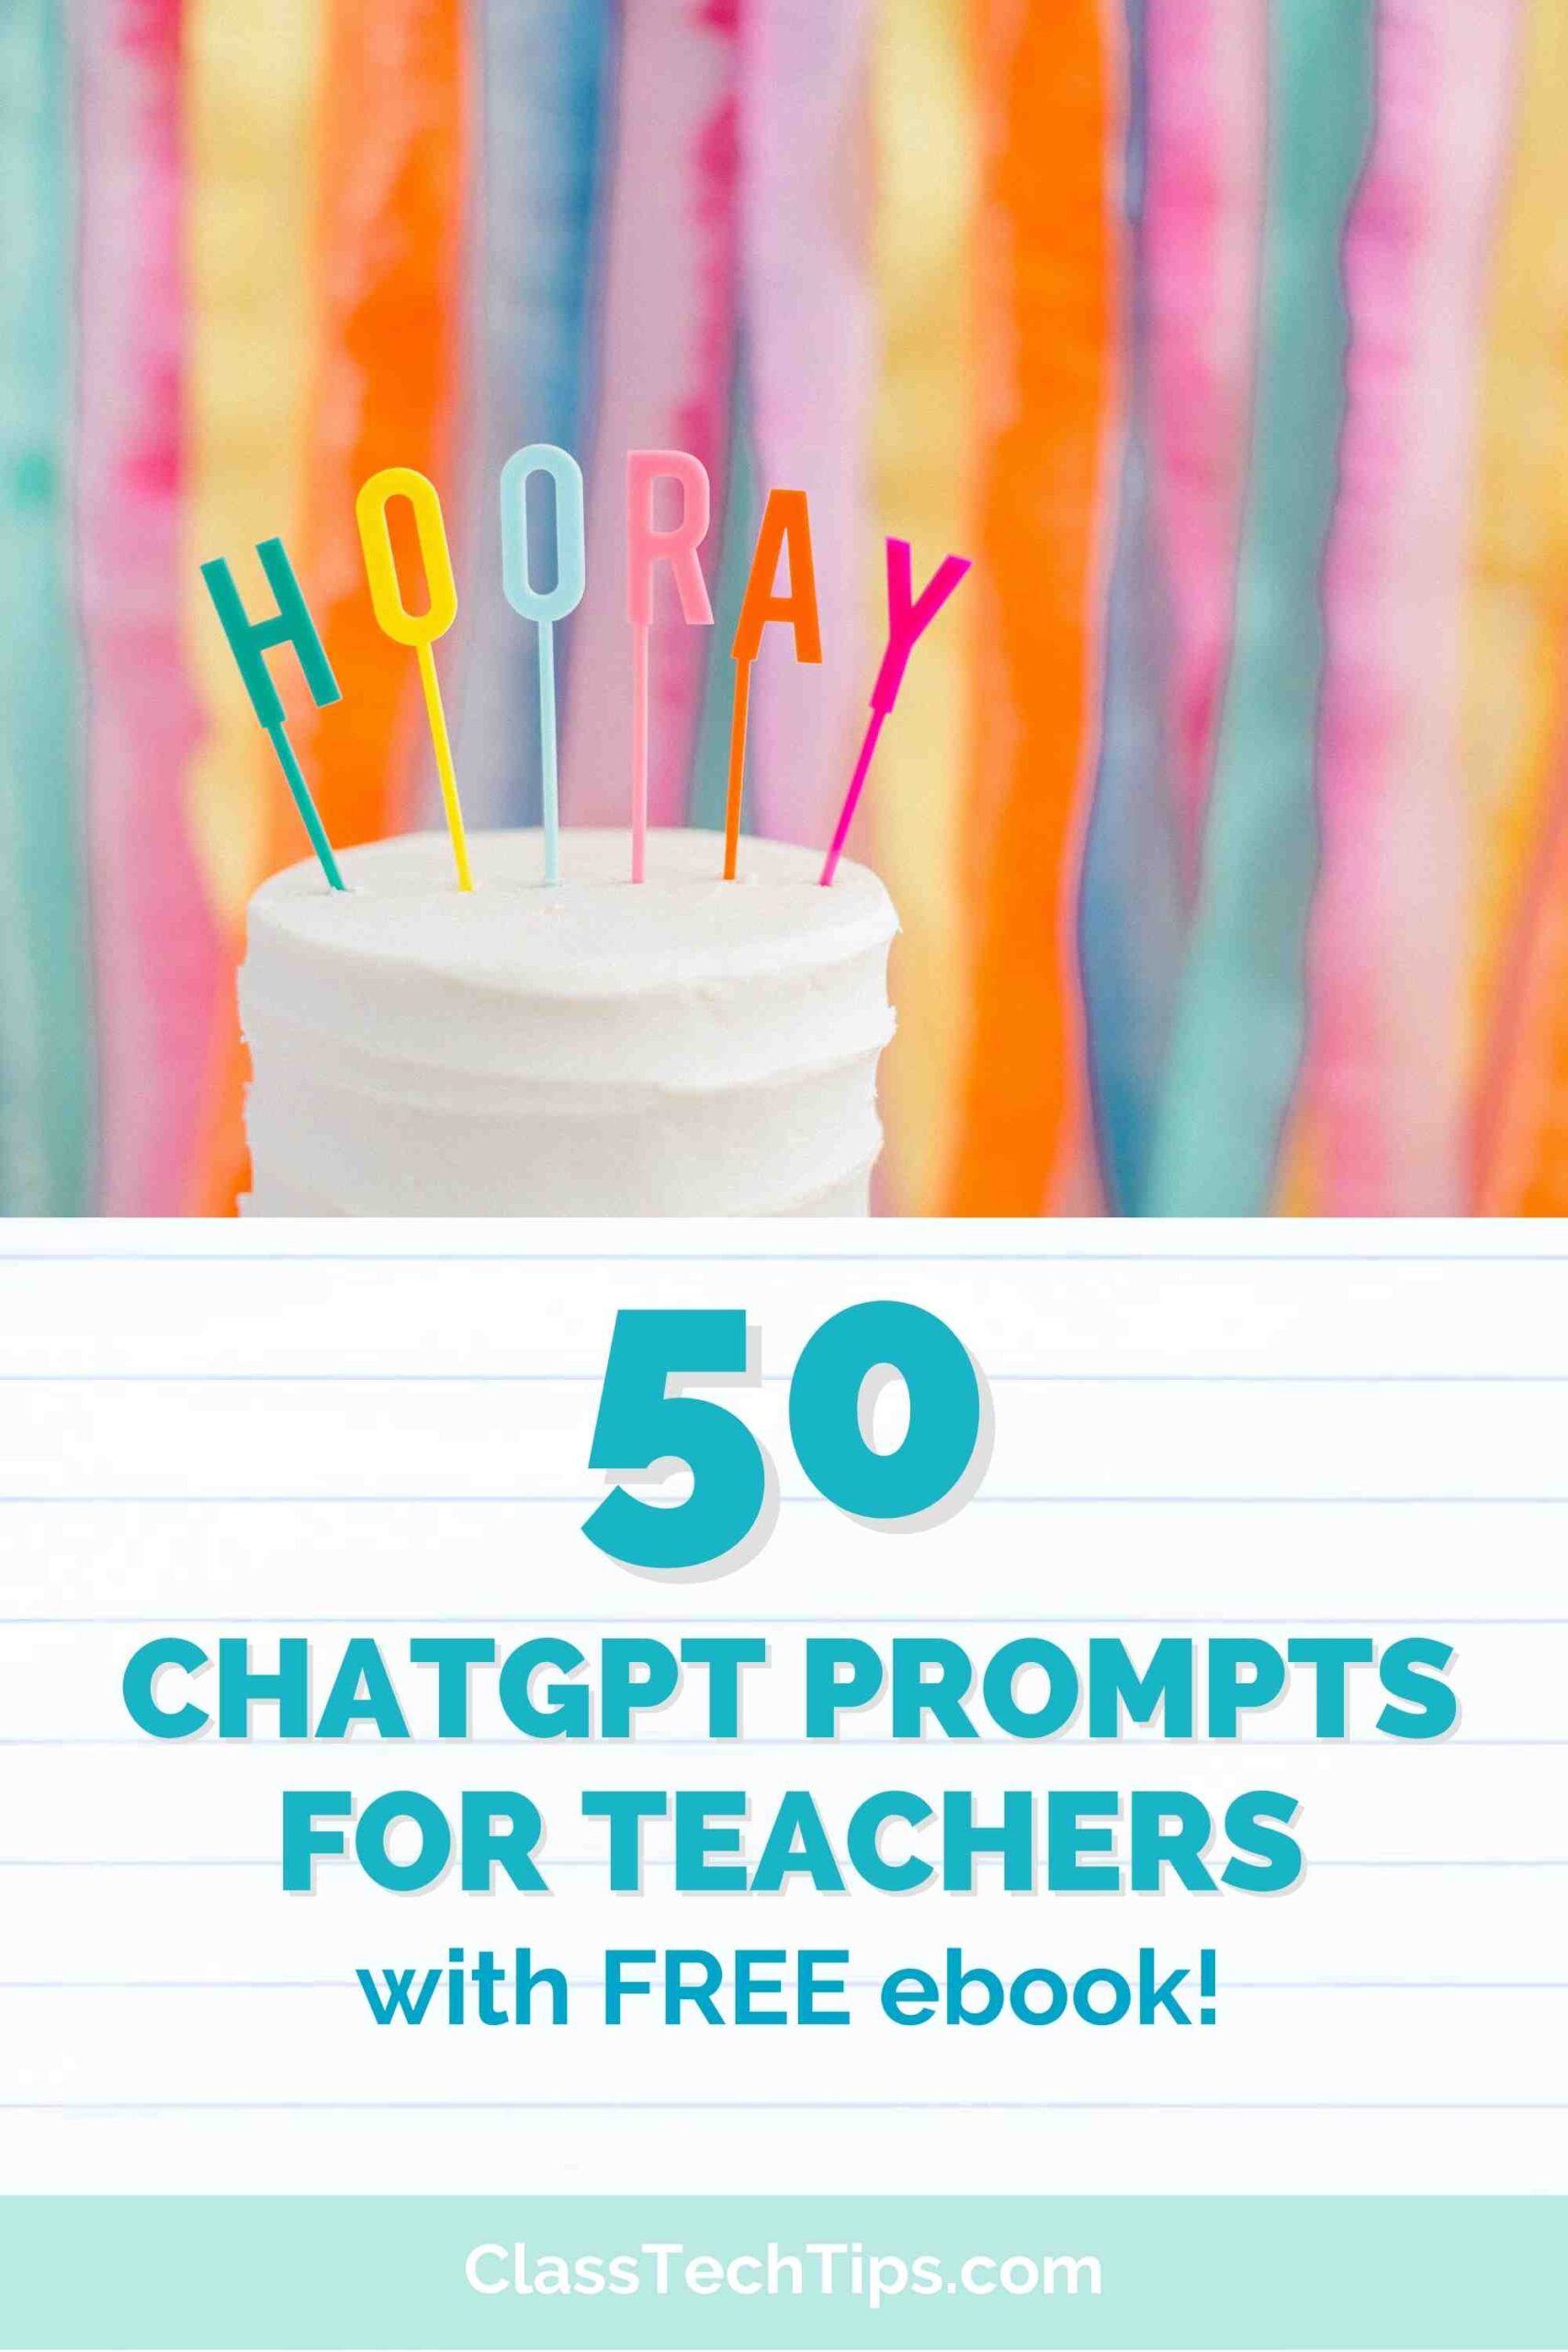 I have 50 ChatGPT prompts for teachers you can use to save time this school year and make the most of this free tool.